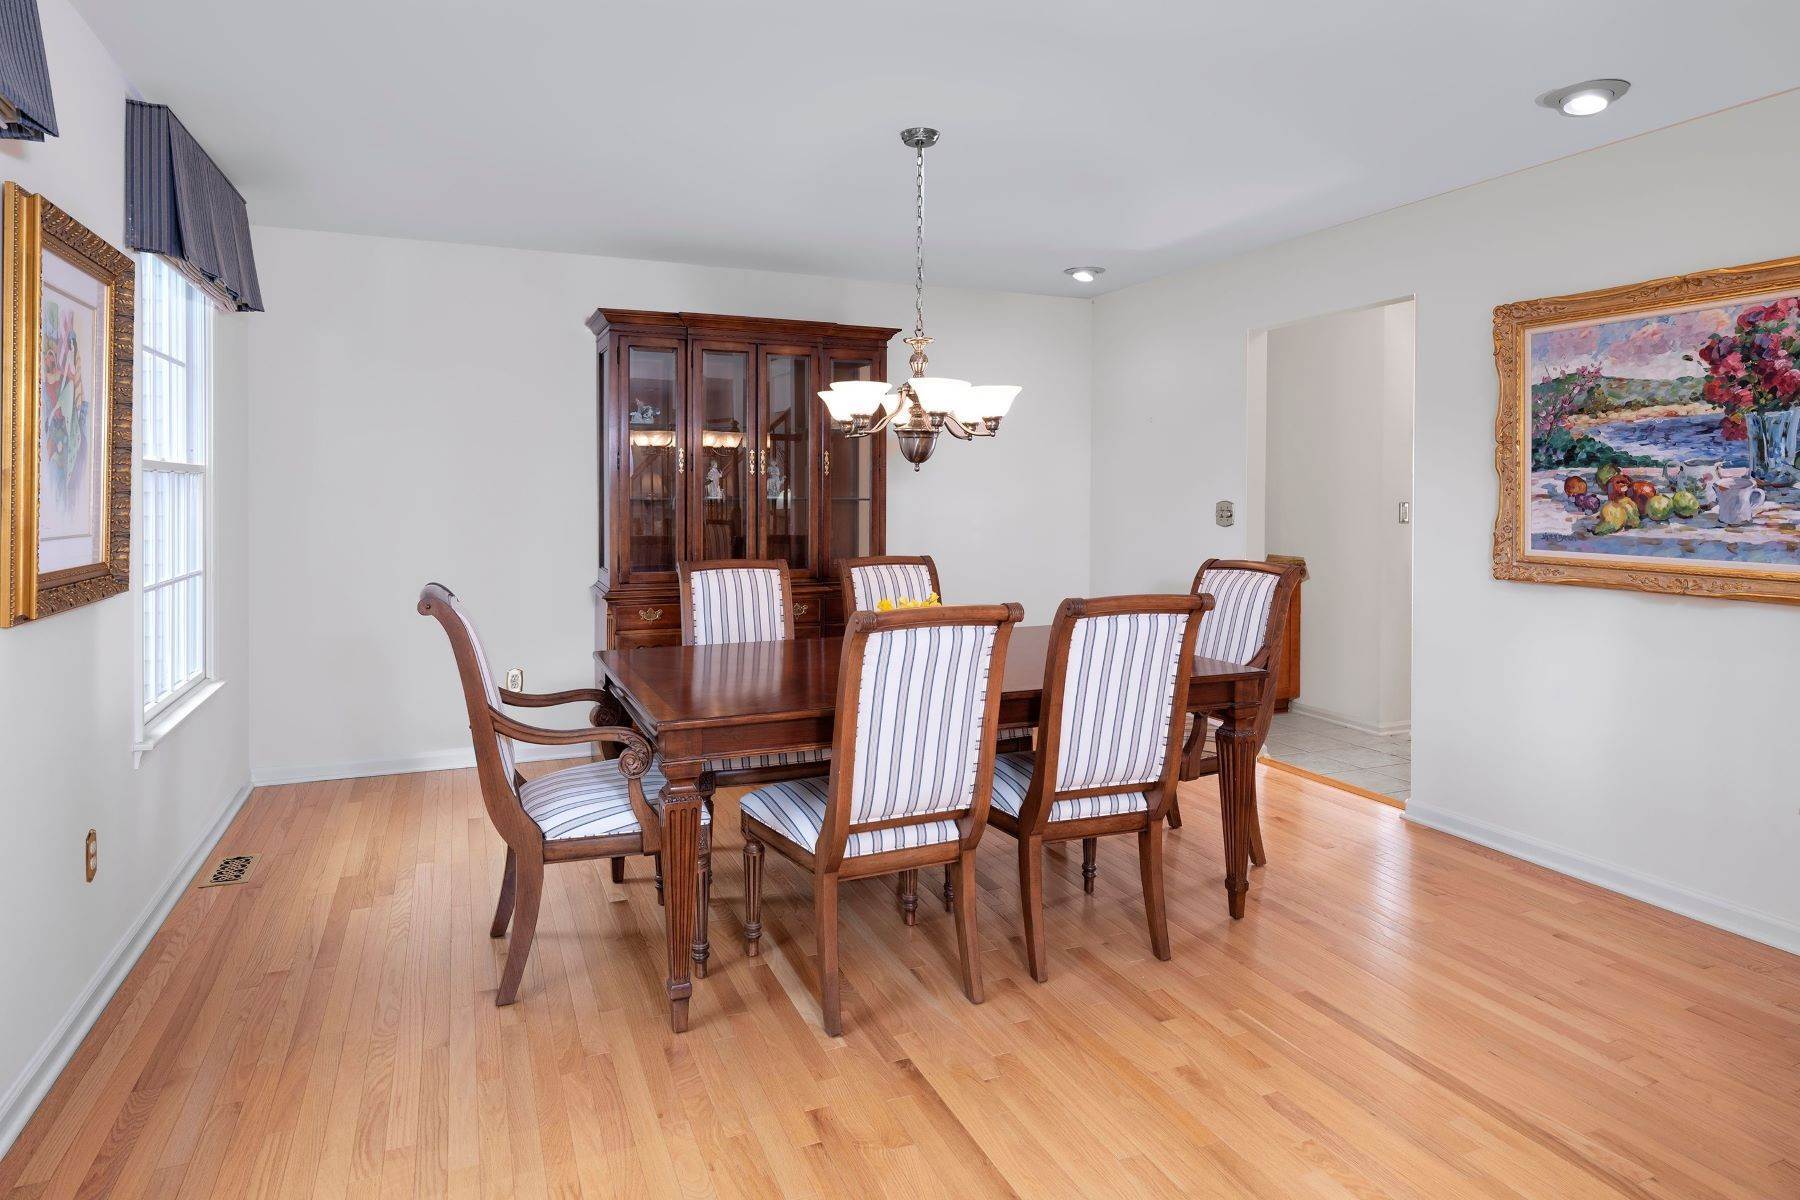 14. Single Family Homes for Sale at Totally Spotless and Full of Wonderful Surprises! 16 Priory Road, West Windsor, New Jersey 08550 United States